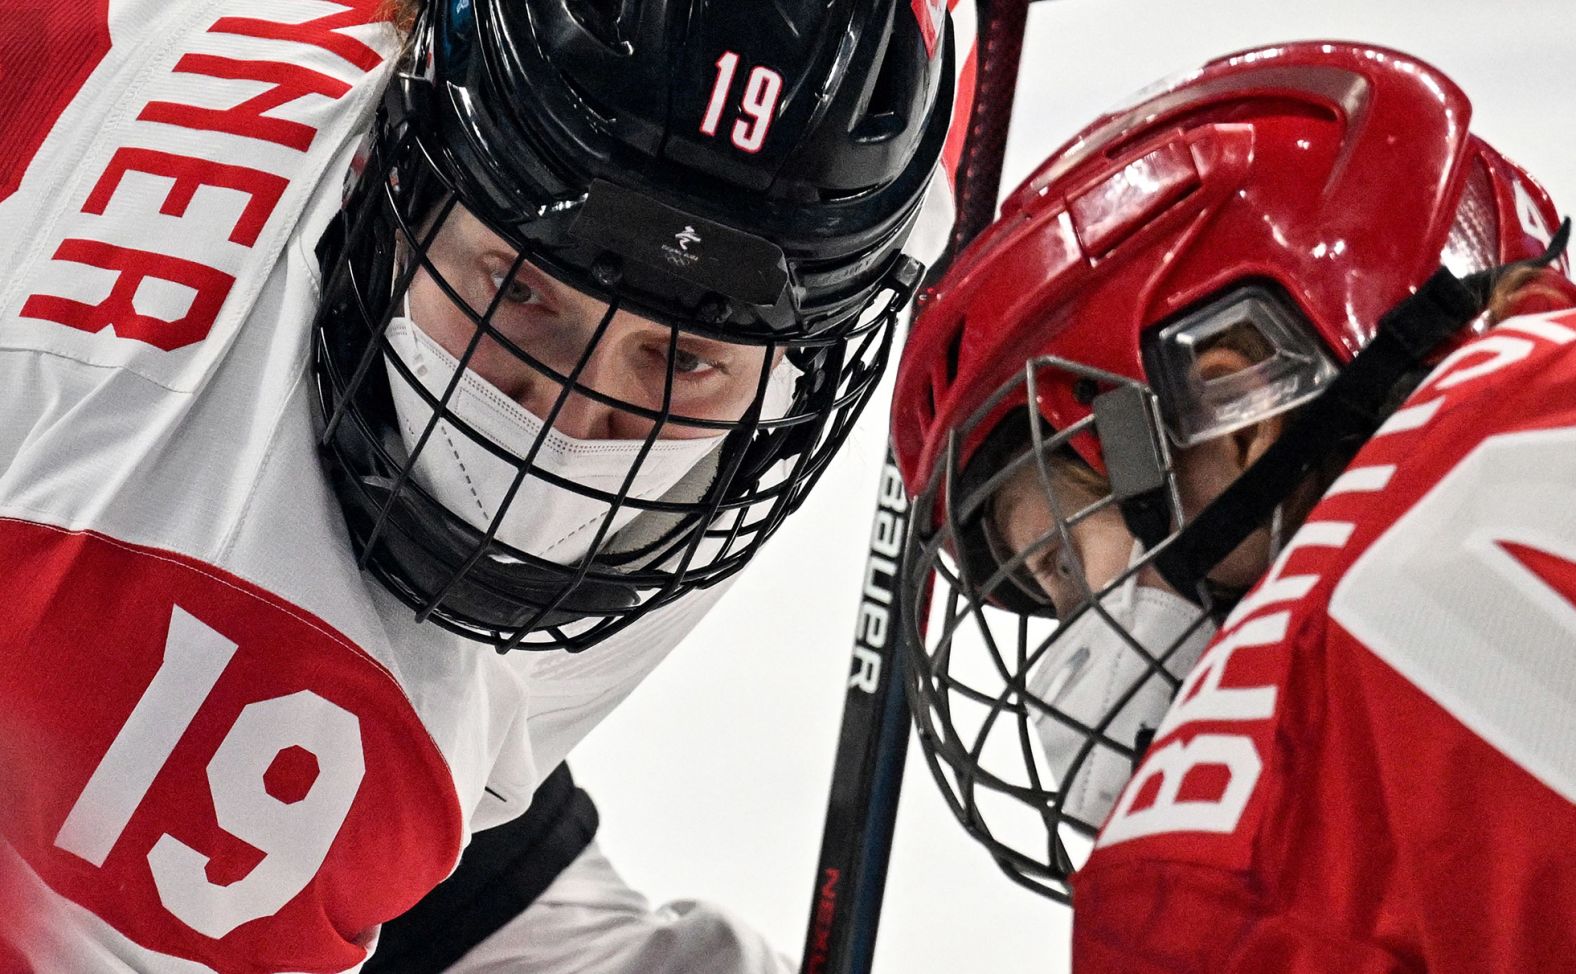 Canadian hockey player Brianne Jenner, left, faces off against the Russian Olympic Committee's Oxana Bratishcheva during a preliminary round game on February 7. The game was delayed for an hour after the ROC's Covid-19 test results had not arrived on time. When the teams finally played, <a href="index.php?page=&url=https%3A%2F%2Fwww.cnn.com%2Fworld%2Flive-news%2Fbeijing-winter-olympics-02-07-22-spt%2Fh_c00ab11cc129521b0e6f6f86644487b4" target="_blank">they wore masks under their cages.</a>